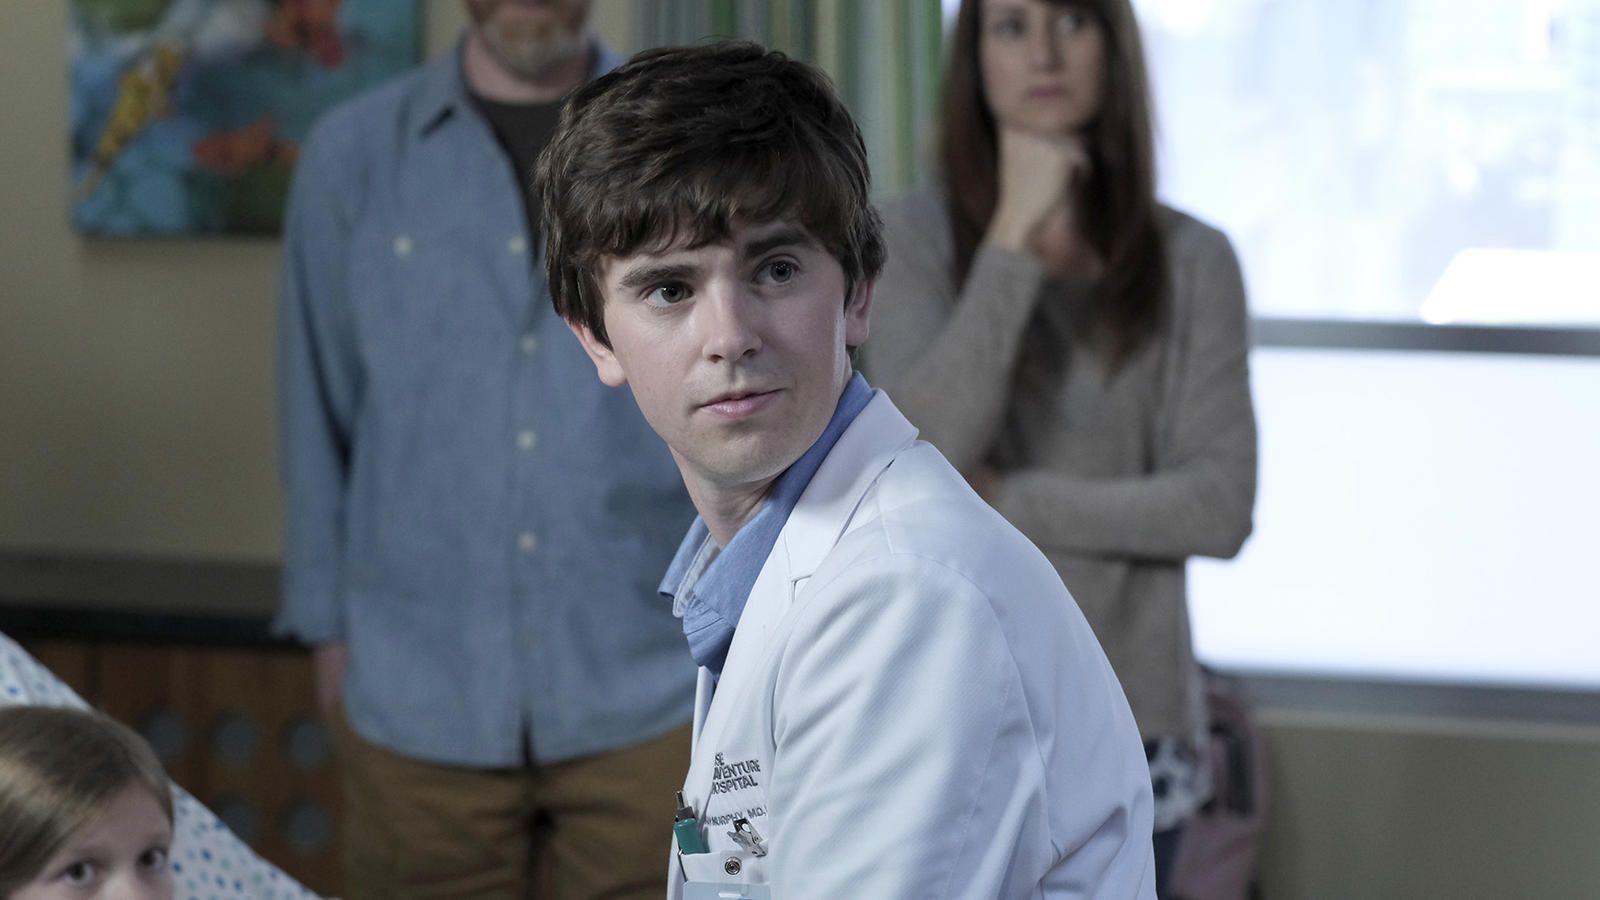 The Good Doctor: Inside Its Surprising Success's News: Our